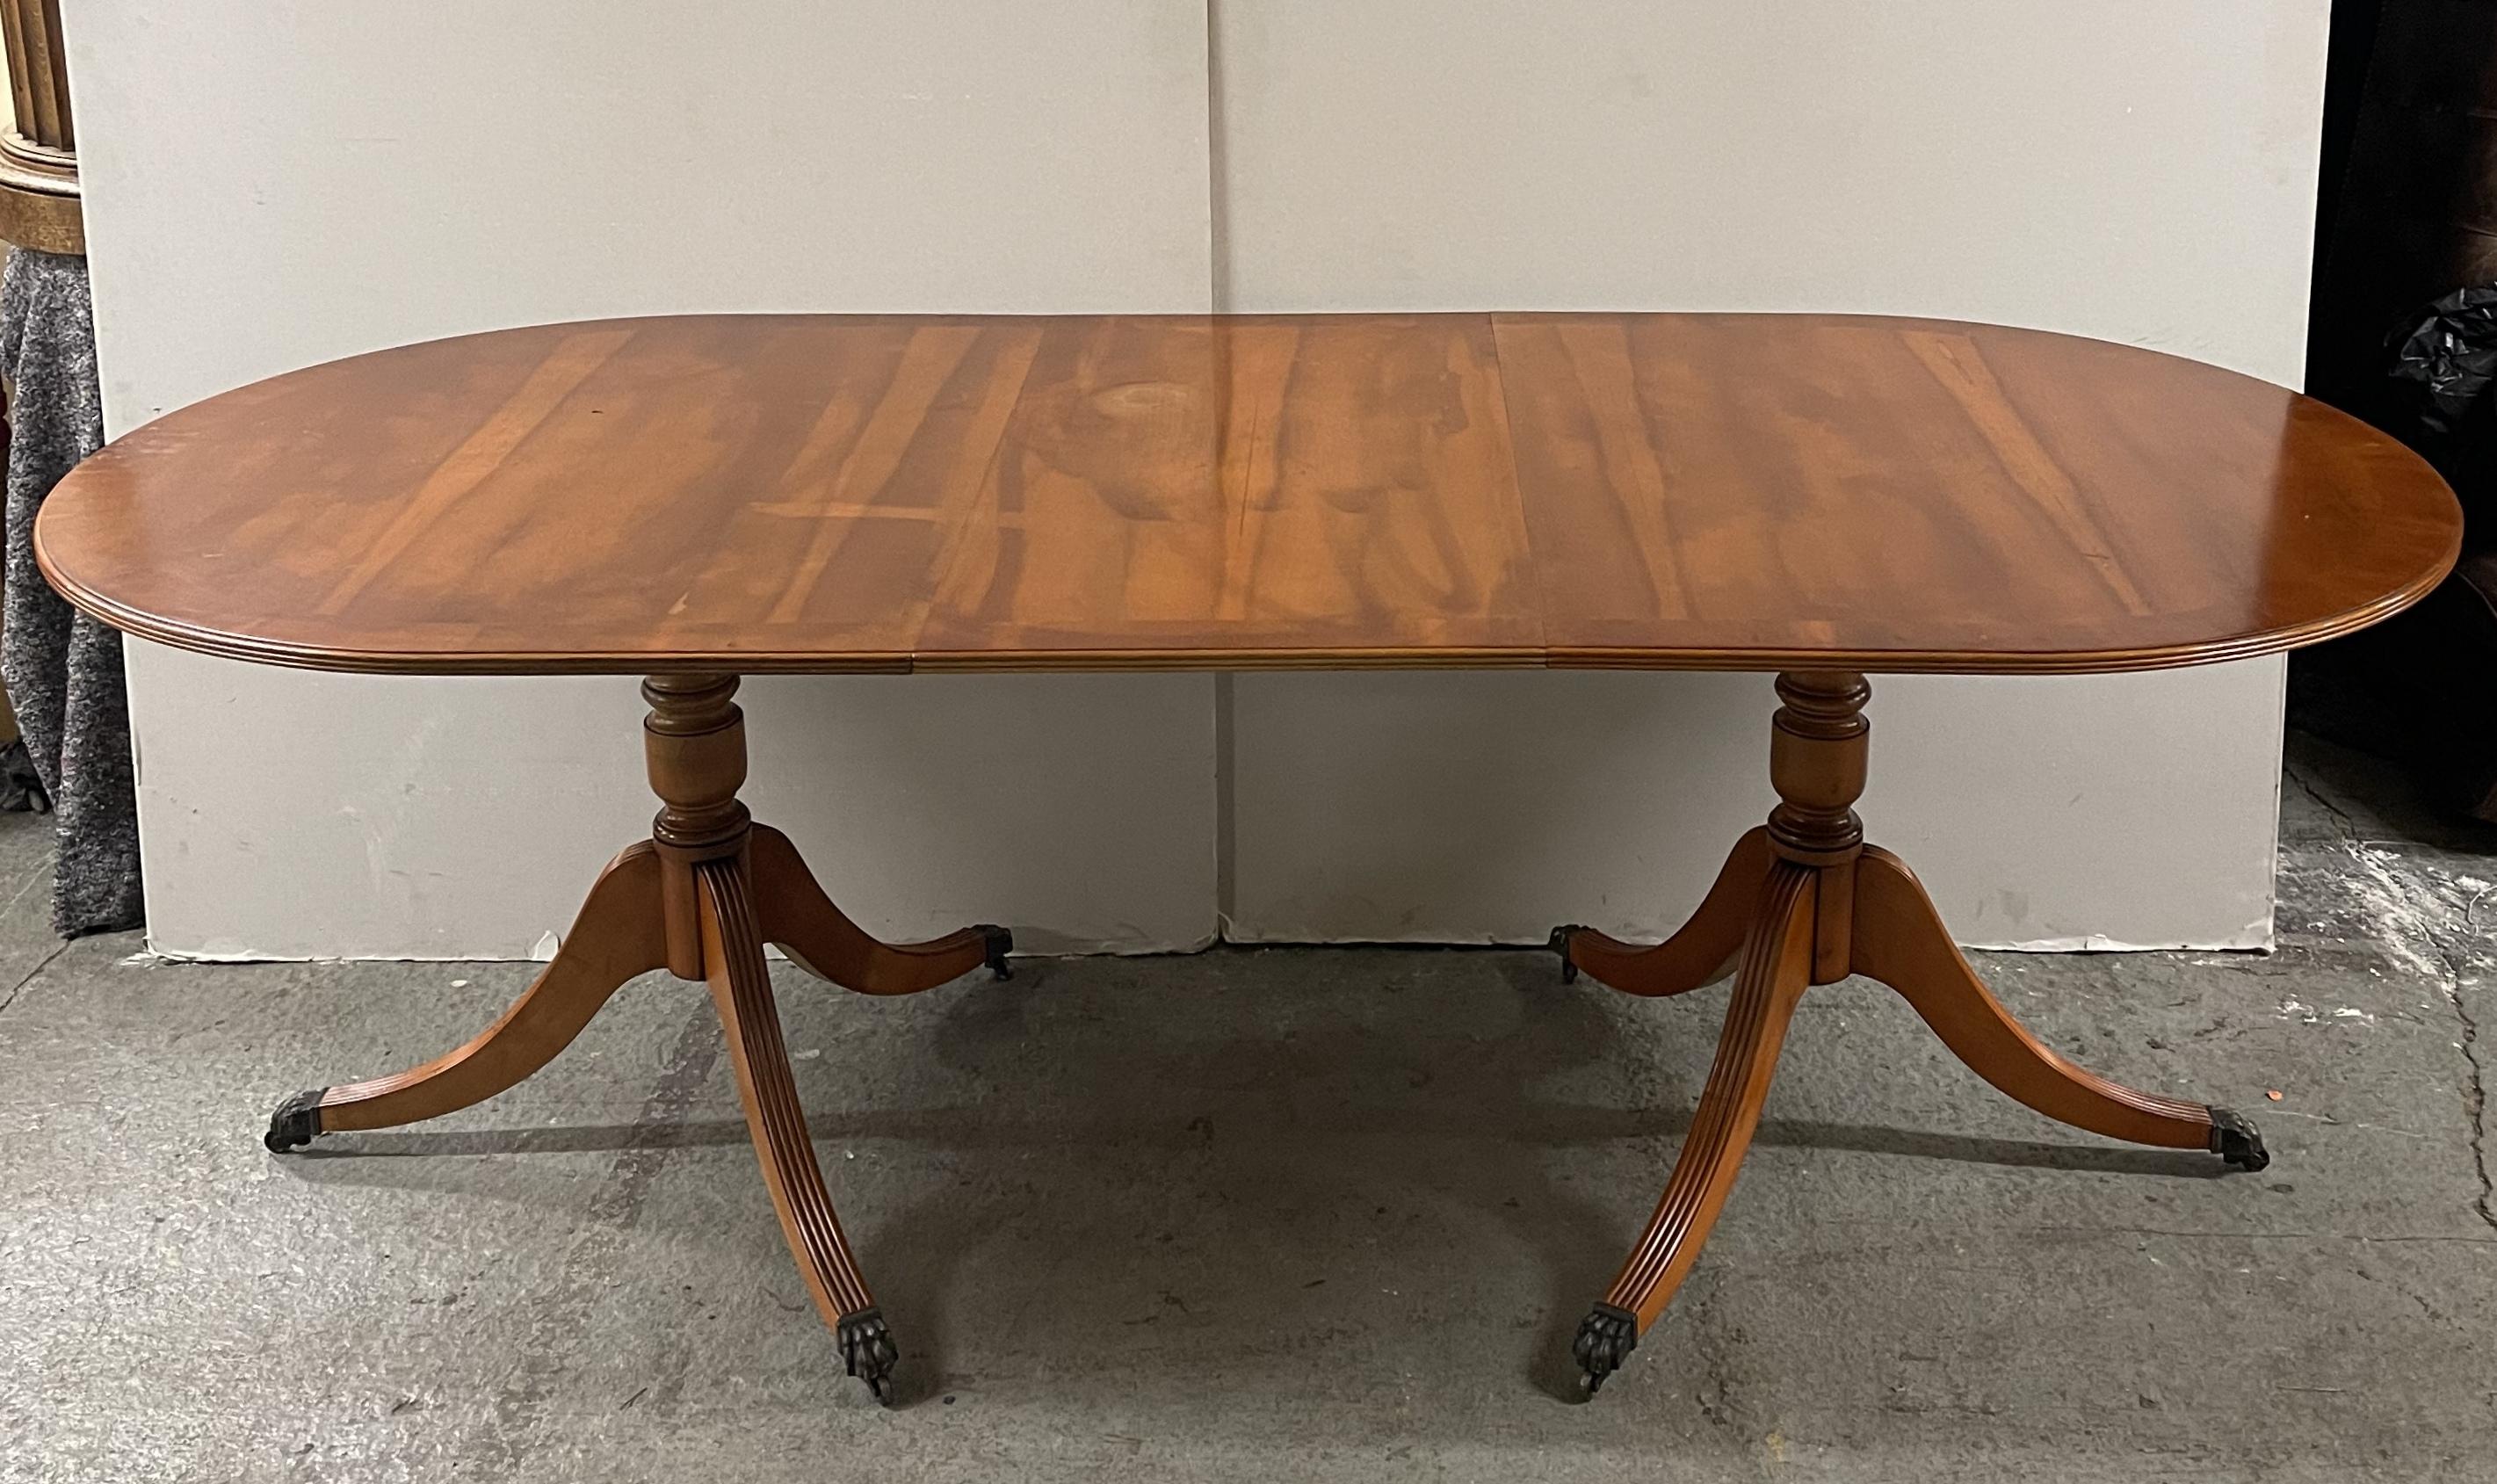 Vintage Yew Wood Twin Pedestal Extending Dining Table Seats 6-8 People For Sale 7